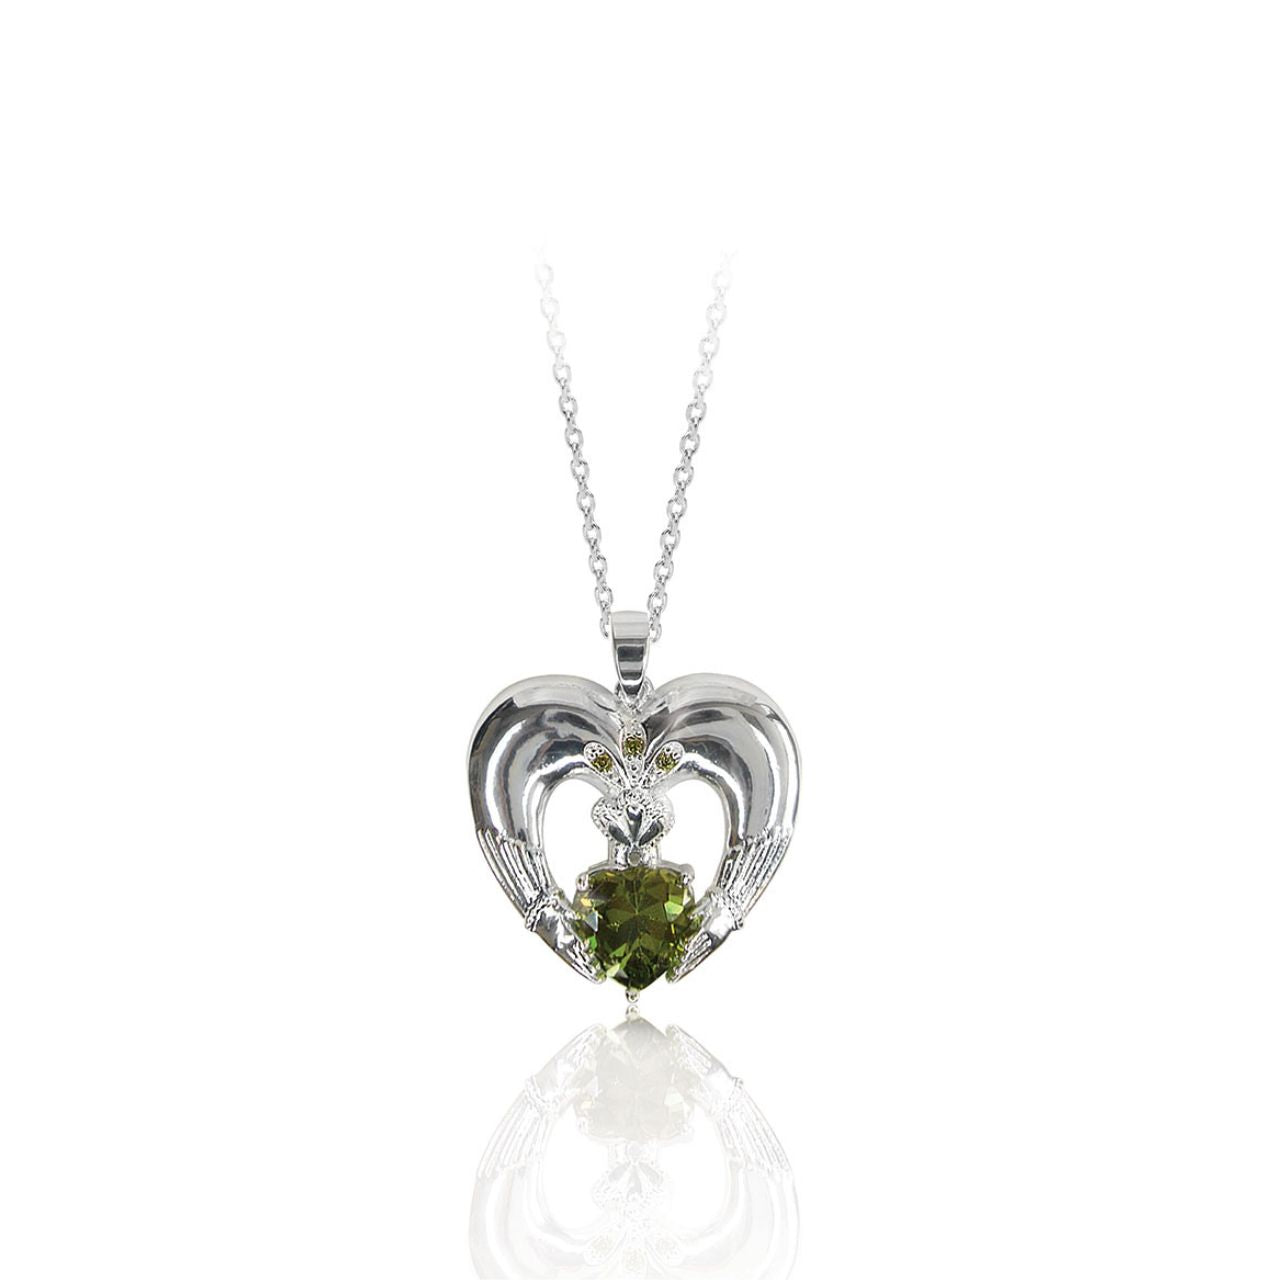 Celebrating love, loyalty and friendship, this heart-shaped Claddagh pendant shimmers. An emerald green heart-shaped stone is set at the center and adorned with a shimmering crown with three green crystal stone accents. This meaningful pendant will be cherished forever. Glistening with a bright polished ﬁnish, it suspends from a sleek linear bale and a cable chain with a 2” extension. It closes securely with a lobster claw clasp.